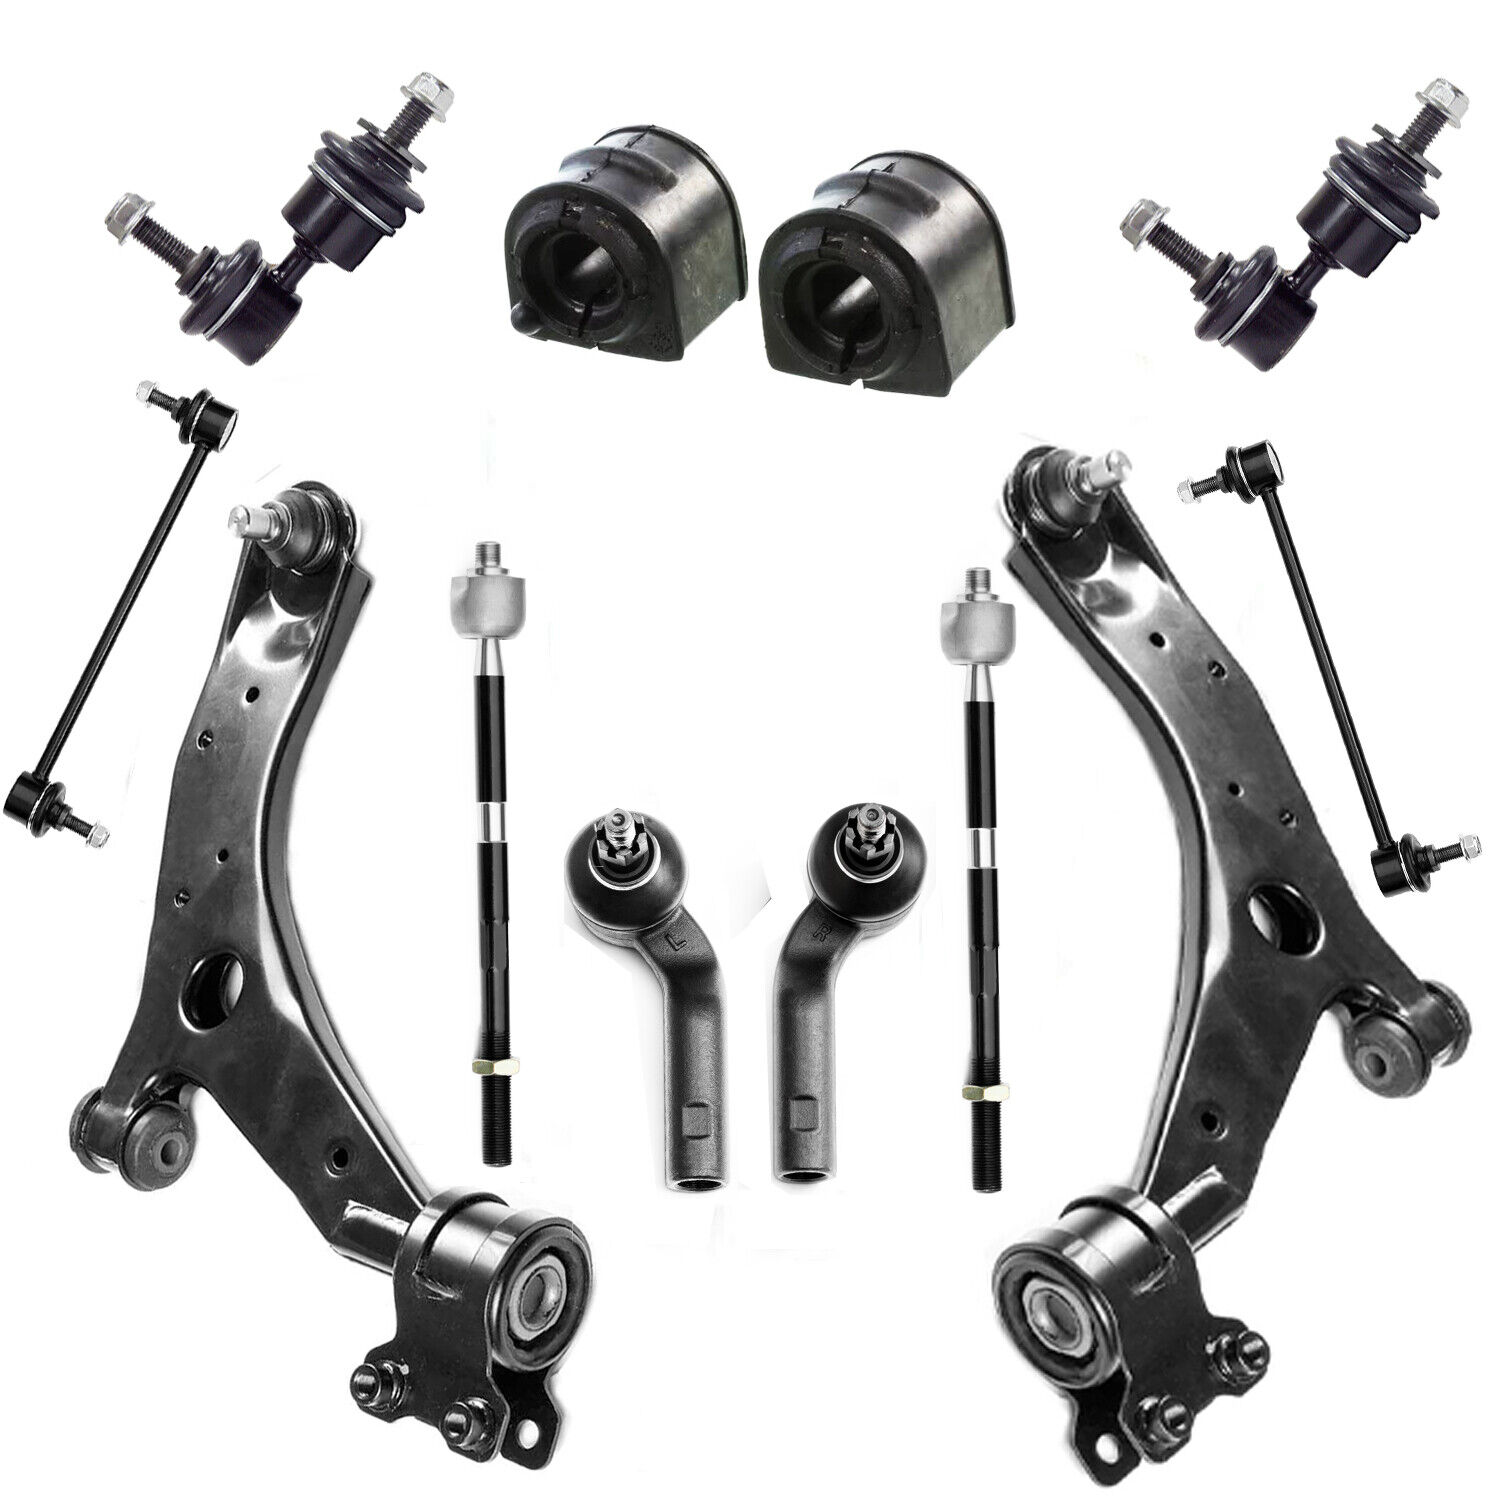 12PC Front Lower Control Arm Suspension Kit Fits 2004-09 Mazda 3 2012-15 Mazda 5